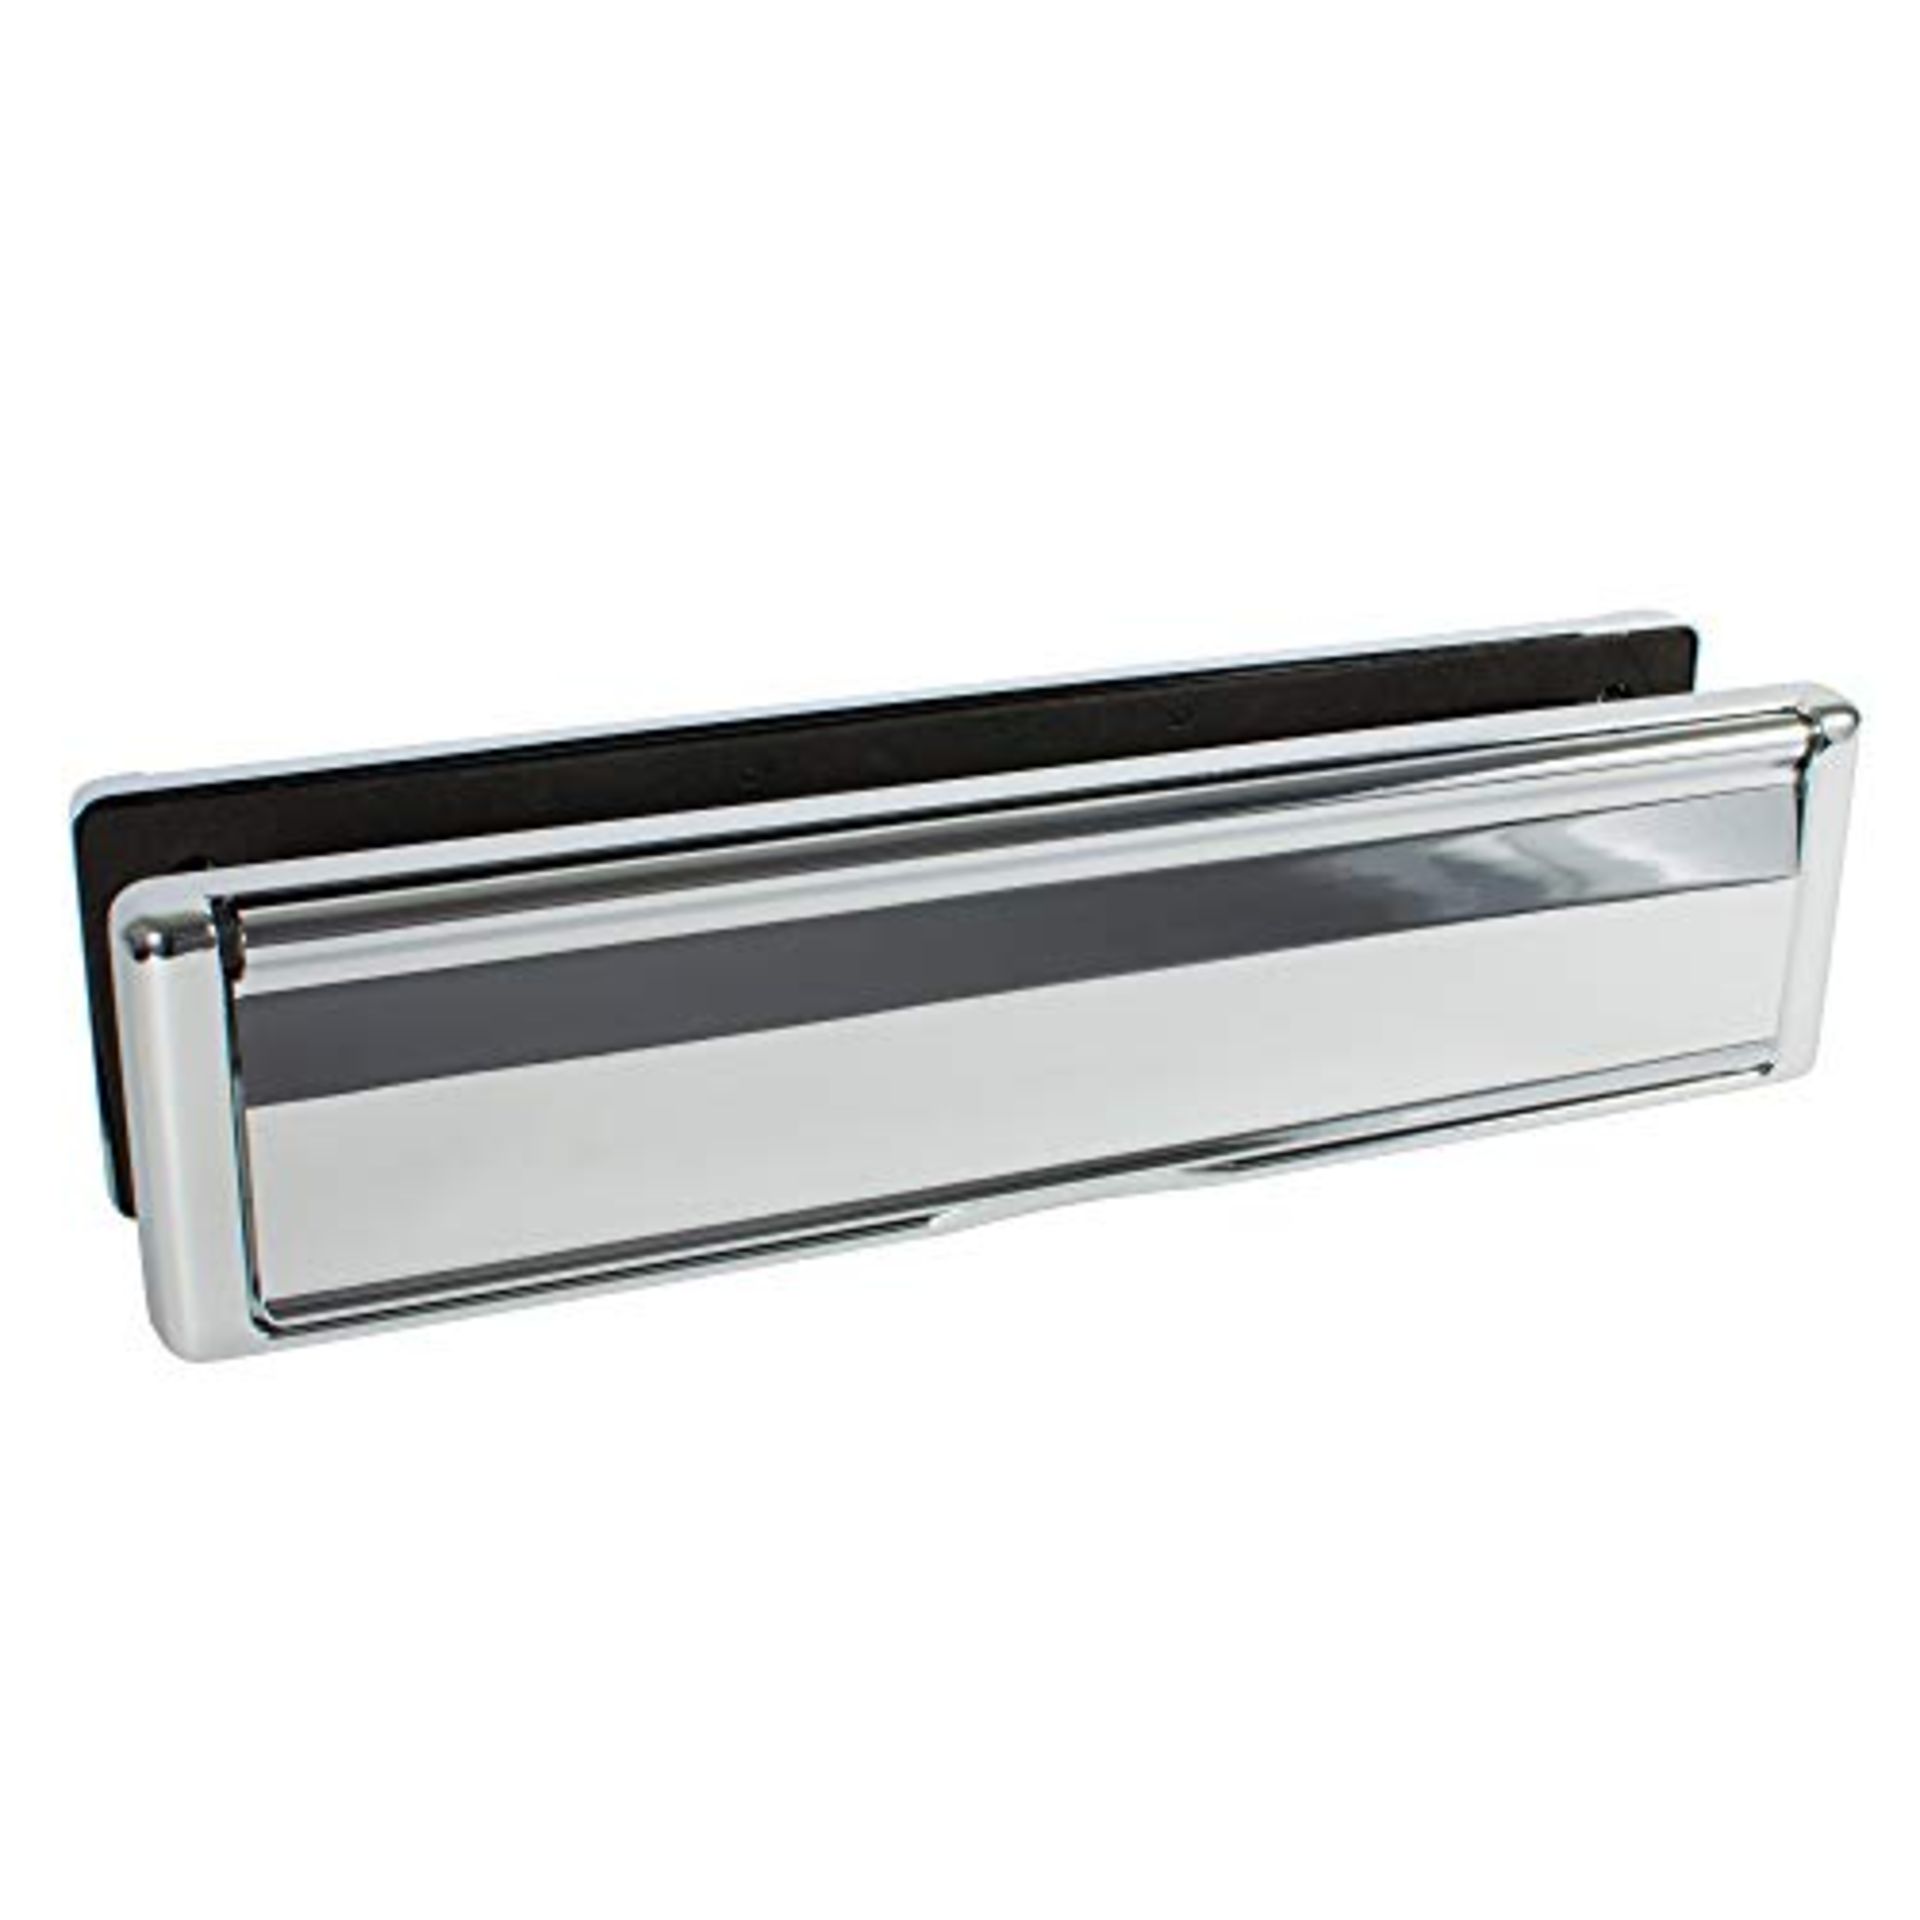 Avocet LPAFCH Affinity 12" Polished Chrome Letterplate Premium Heavy Duty Sprung Lette - Image 5 of 10